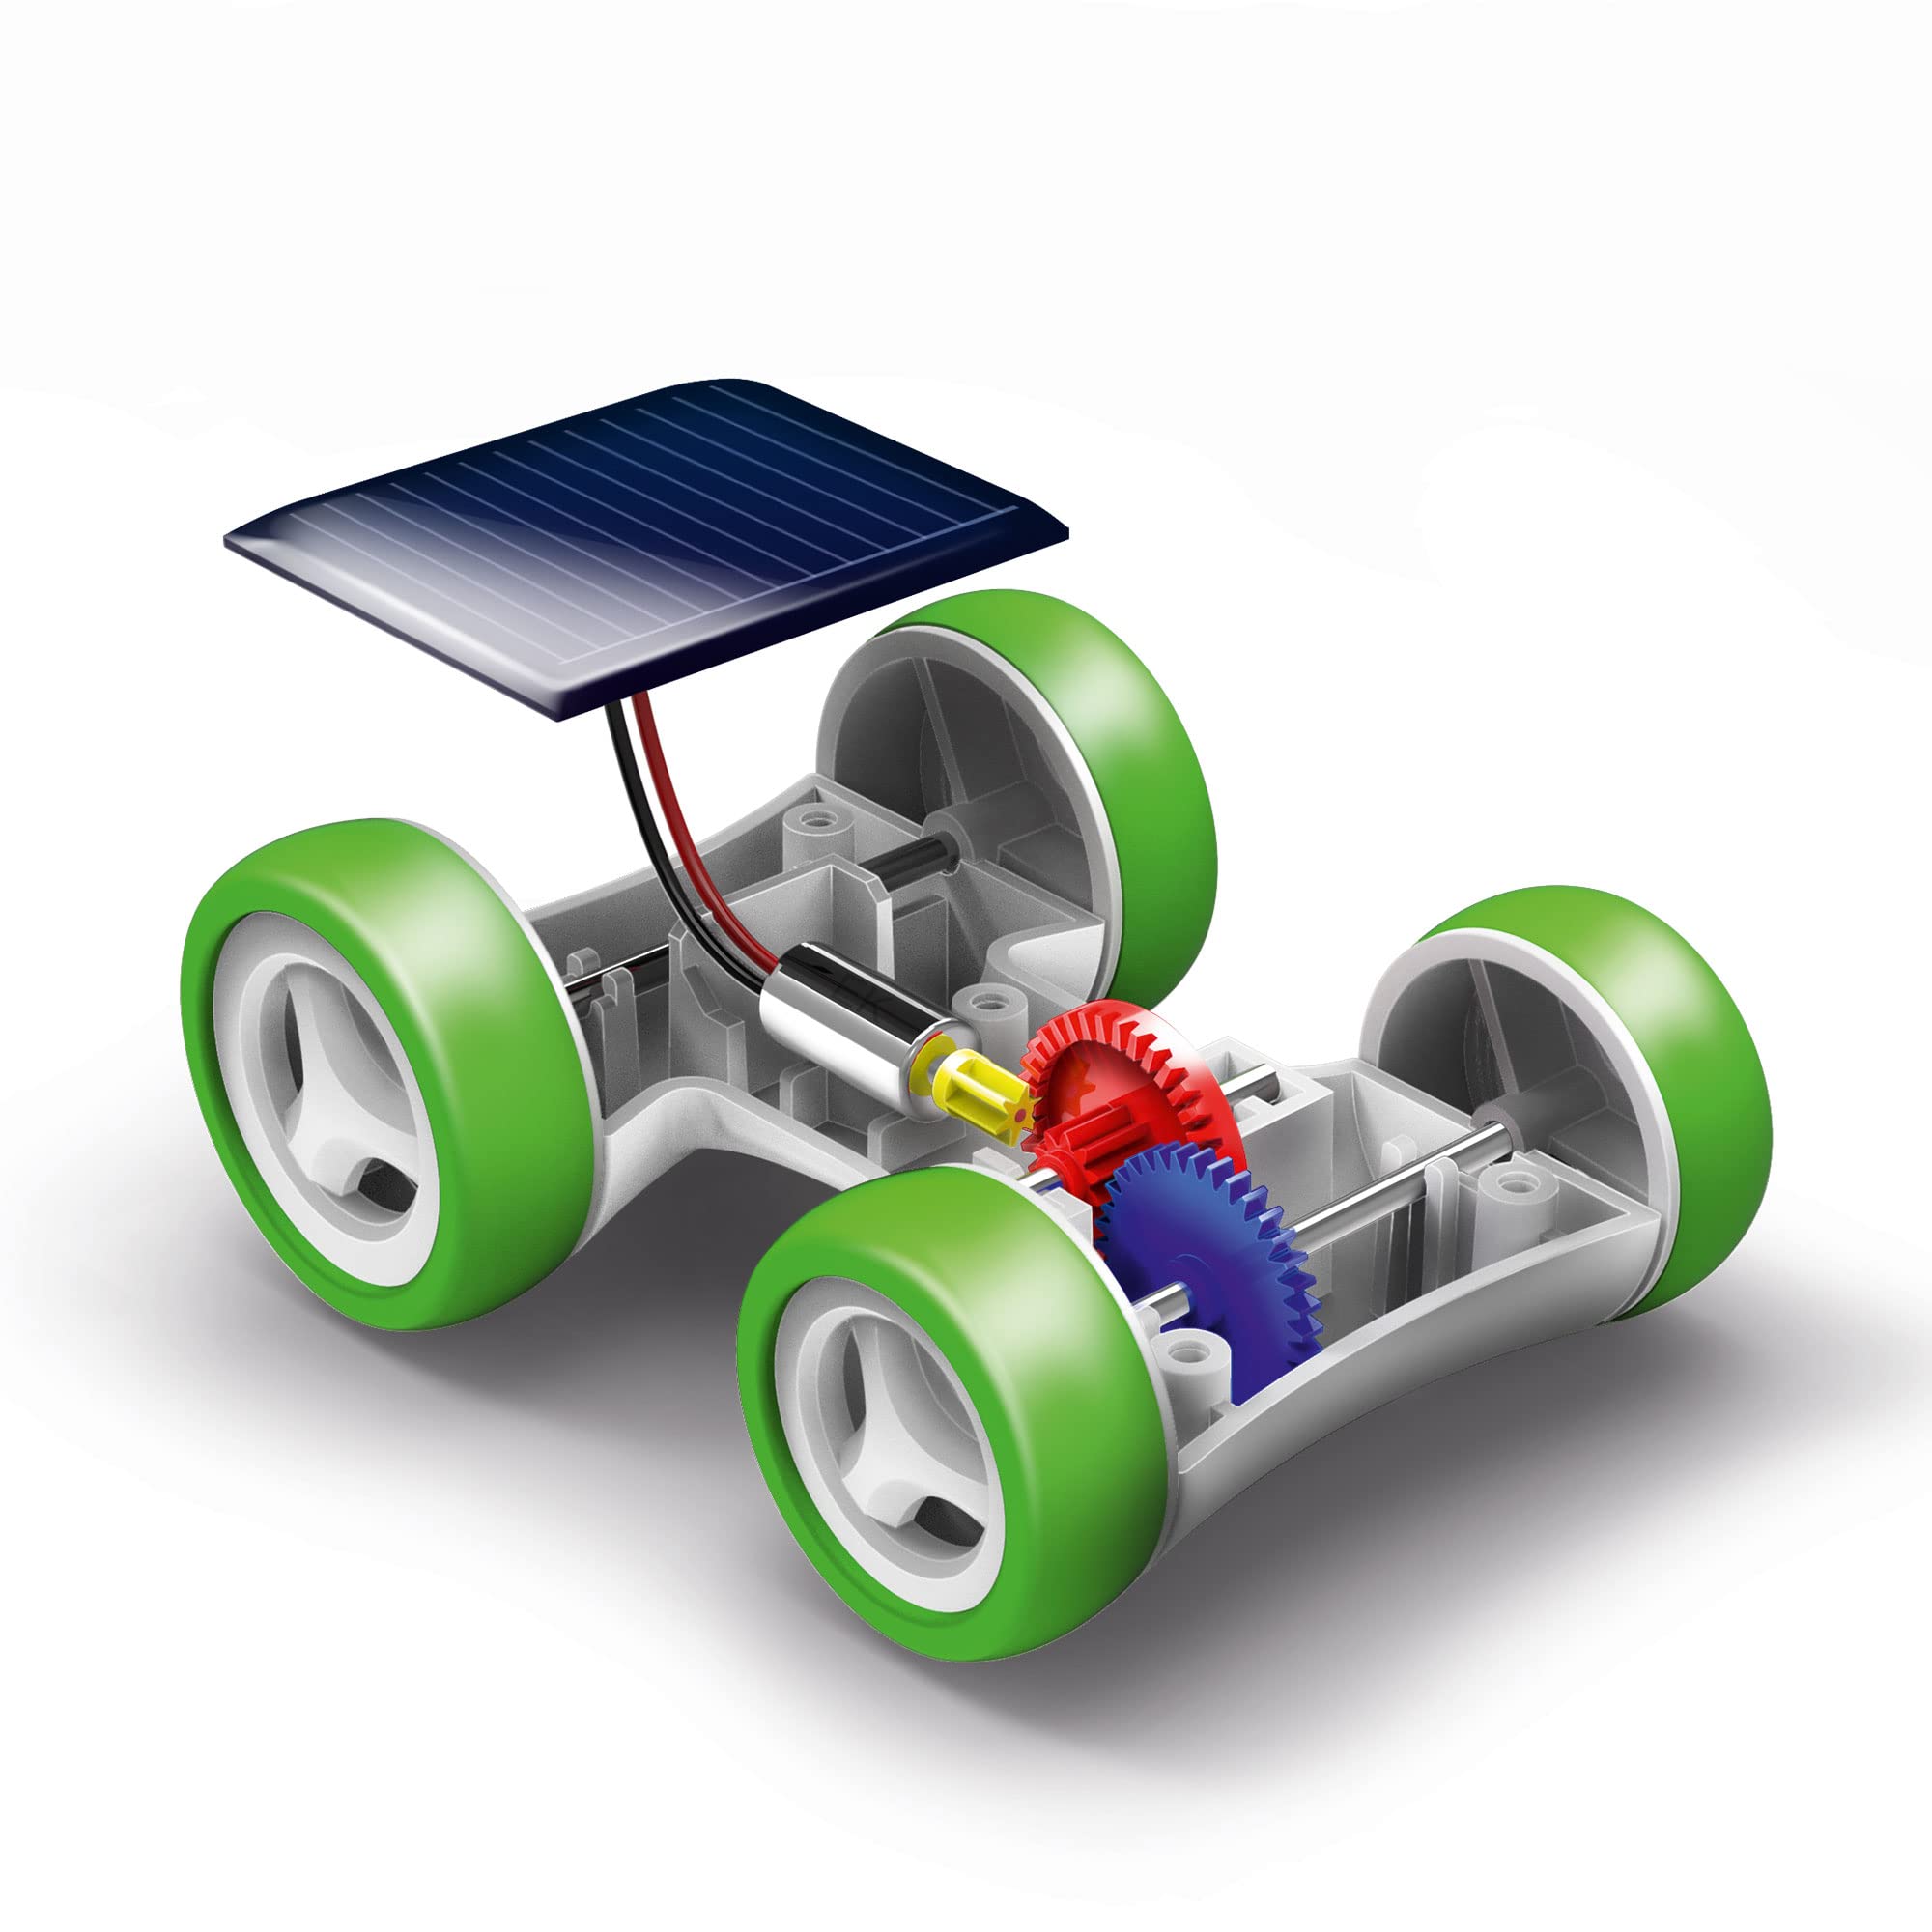 Thames & Kosmos Solar Race Car STEM Experiment Kit | Build a Solar-Powered Race Car | No Batteries Required | Learn About Photovoltaic Technology & Sustainability | Solar Panel Included | for Ages 8+